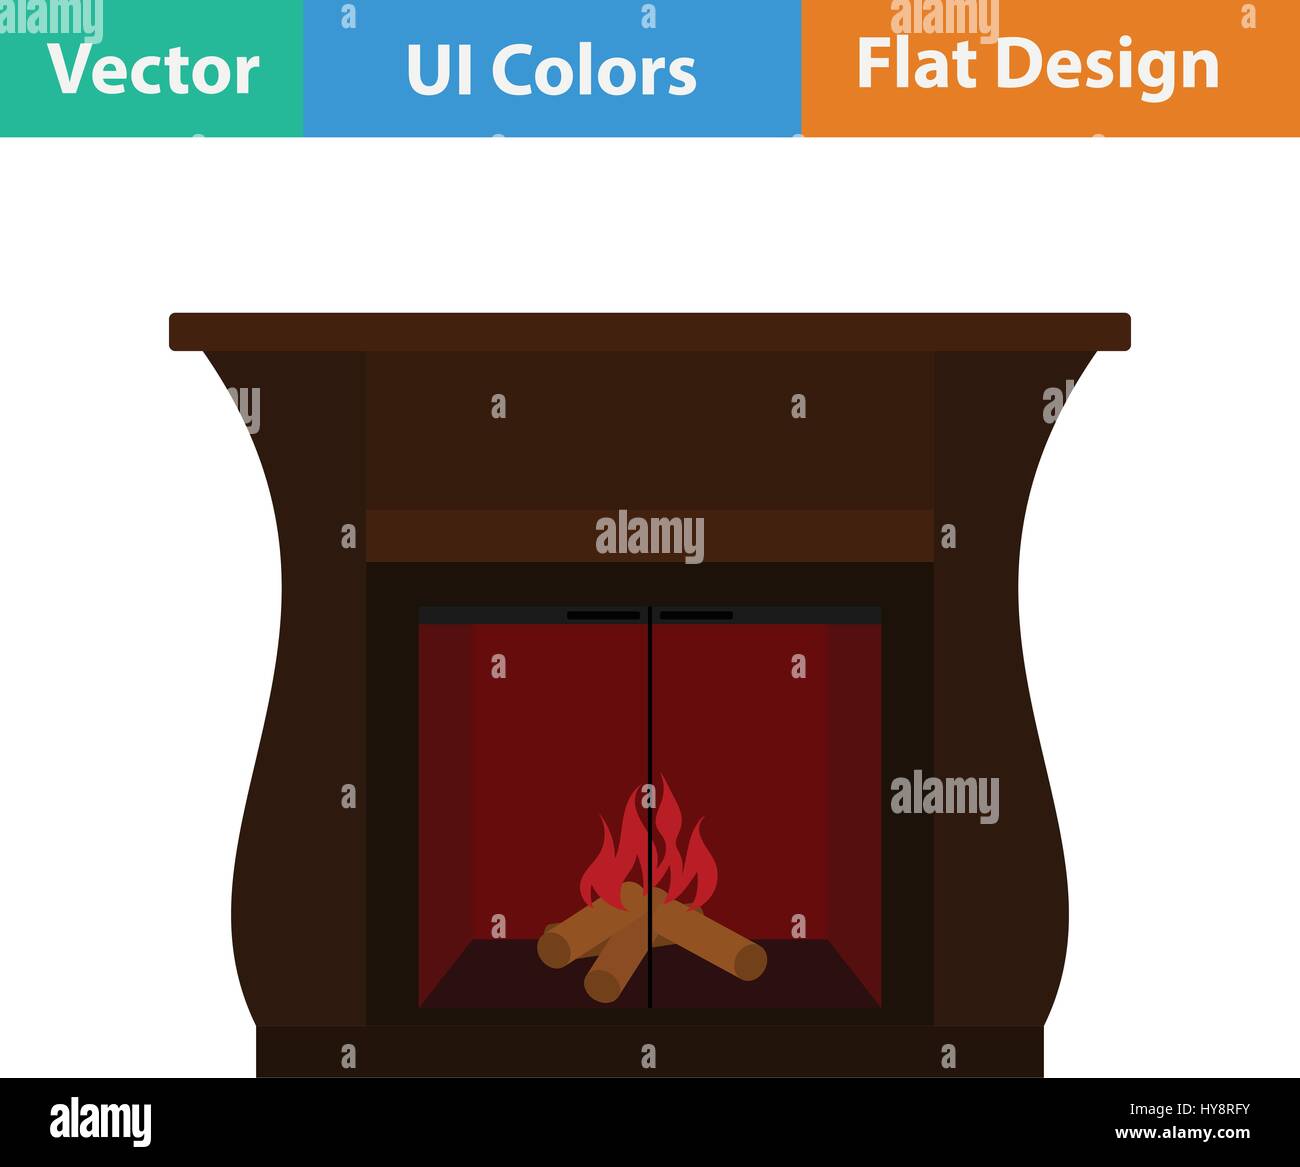 Fireplace with doors icon. Flat design. Vector illustration. Stock Vector